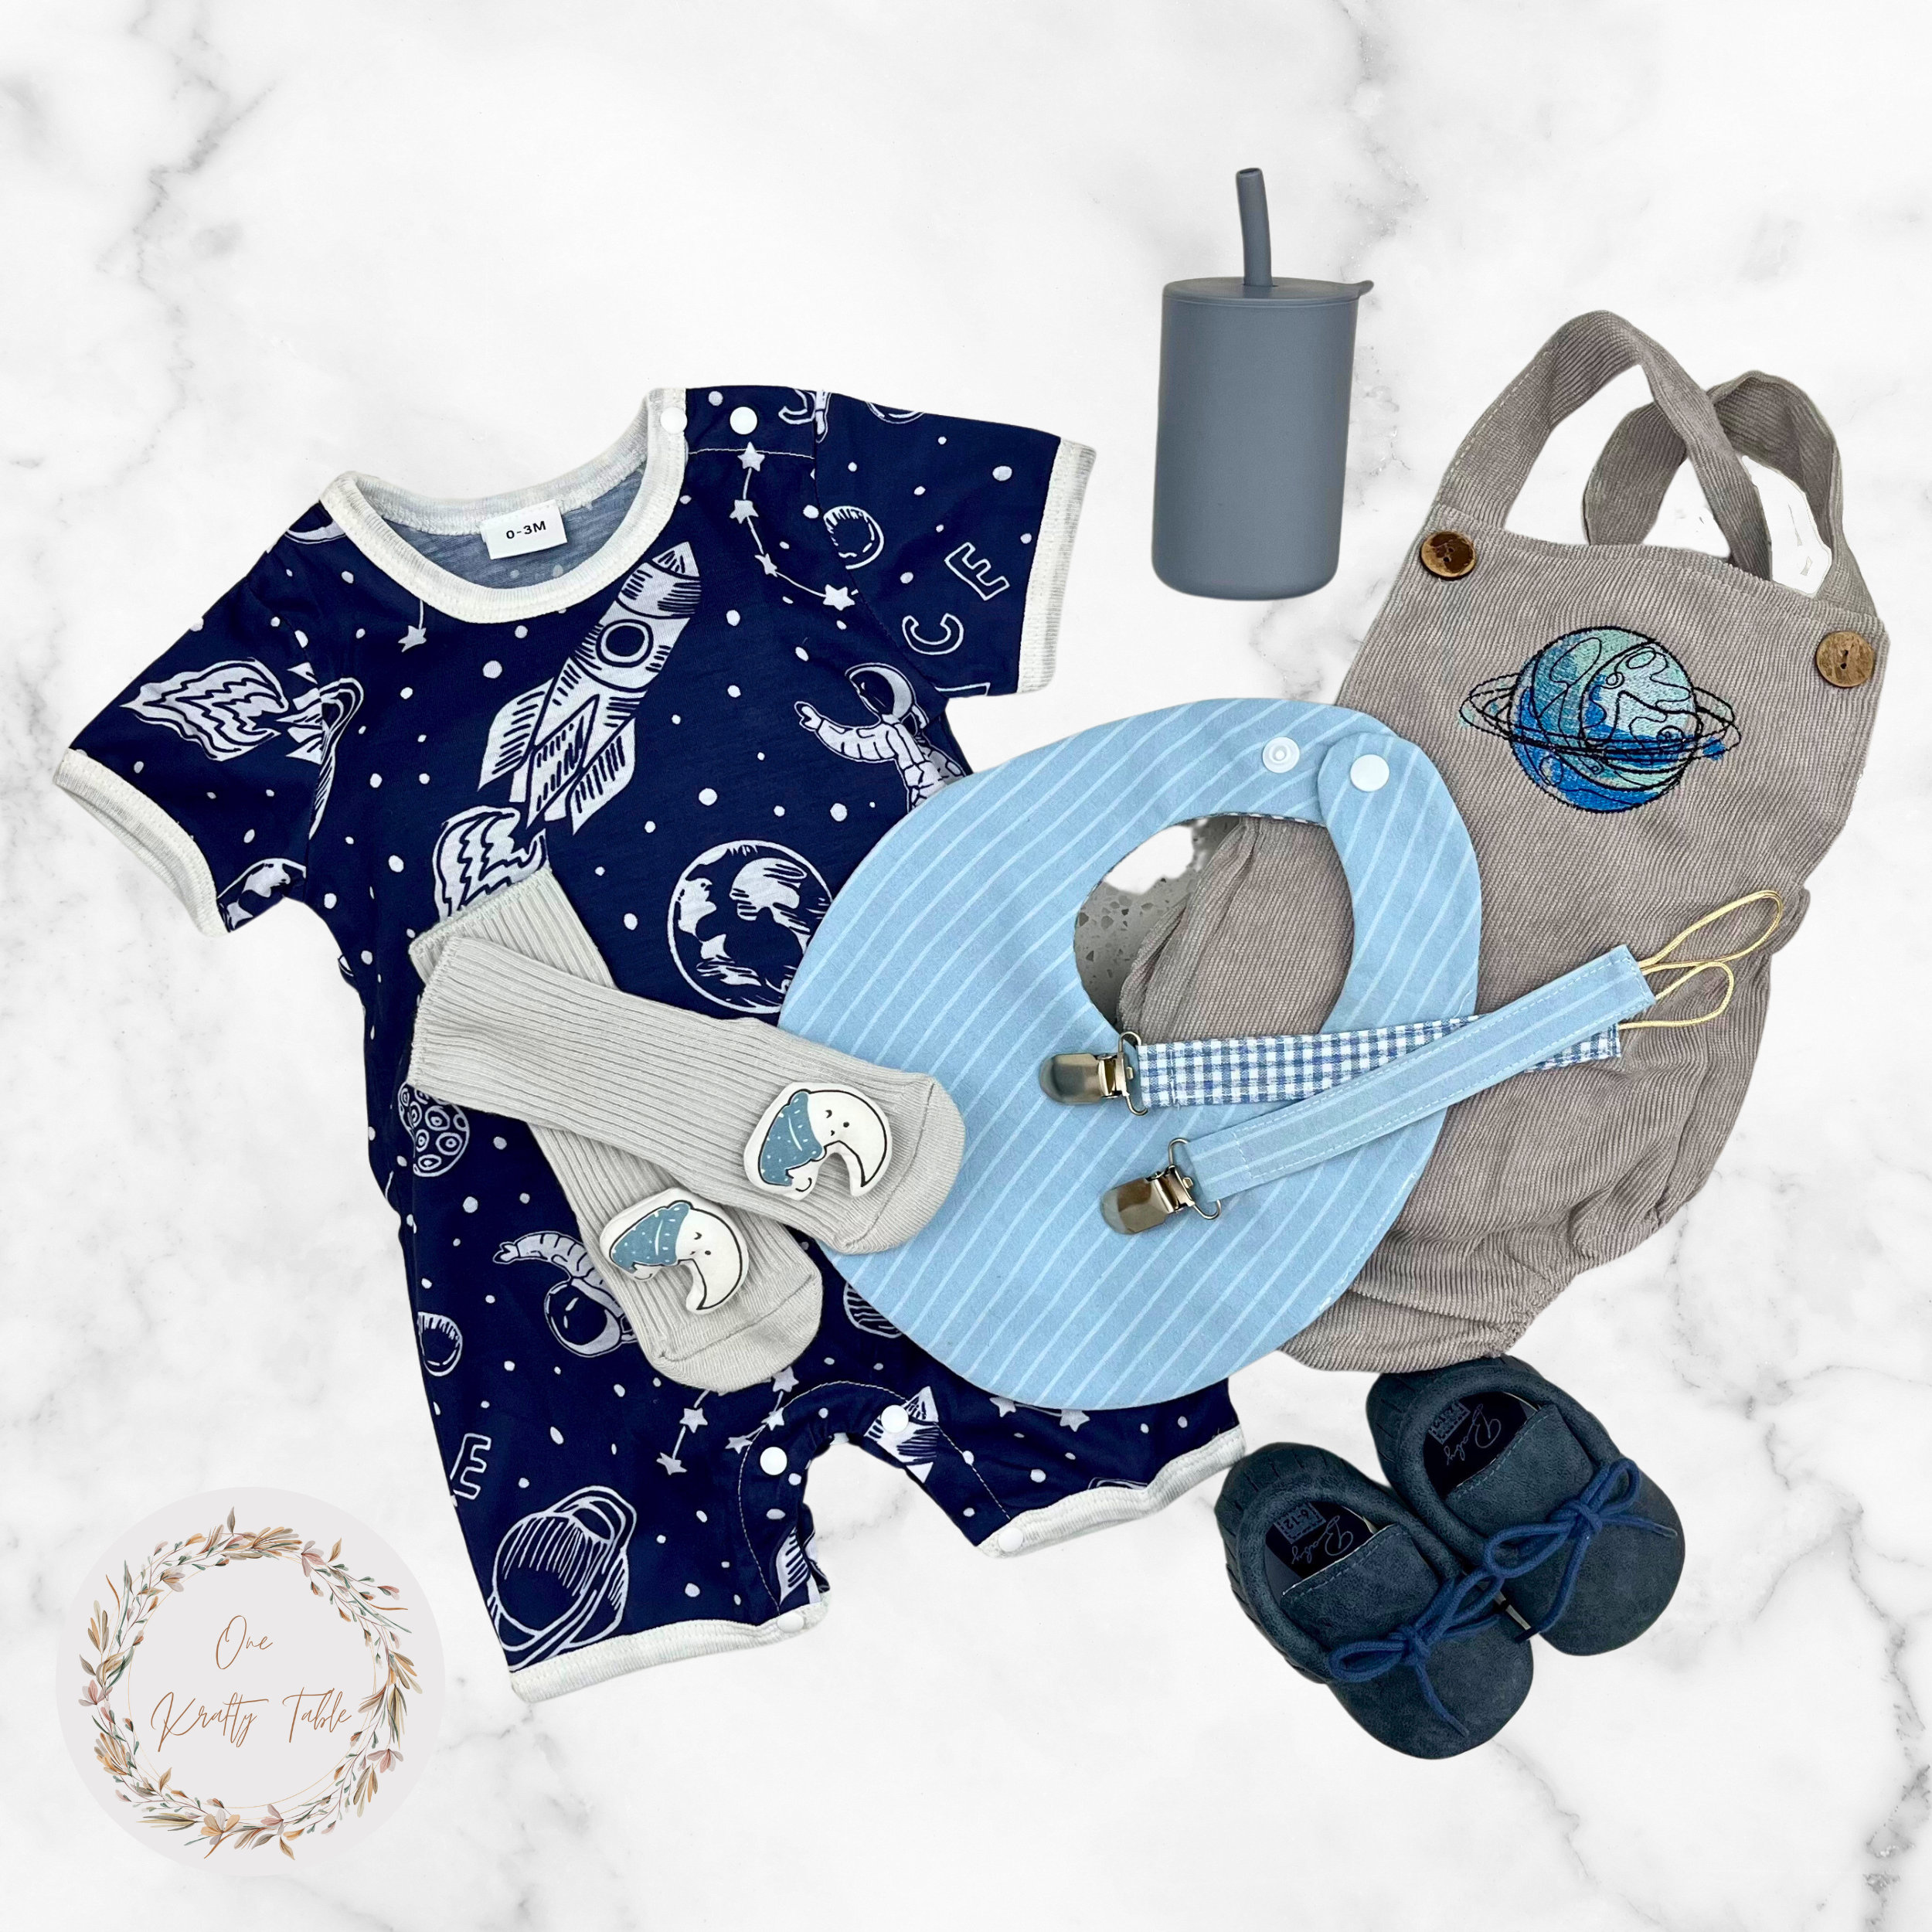 Baby Boy Space Themed Baby Shower Activity, Baby Boy Space Iron-On